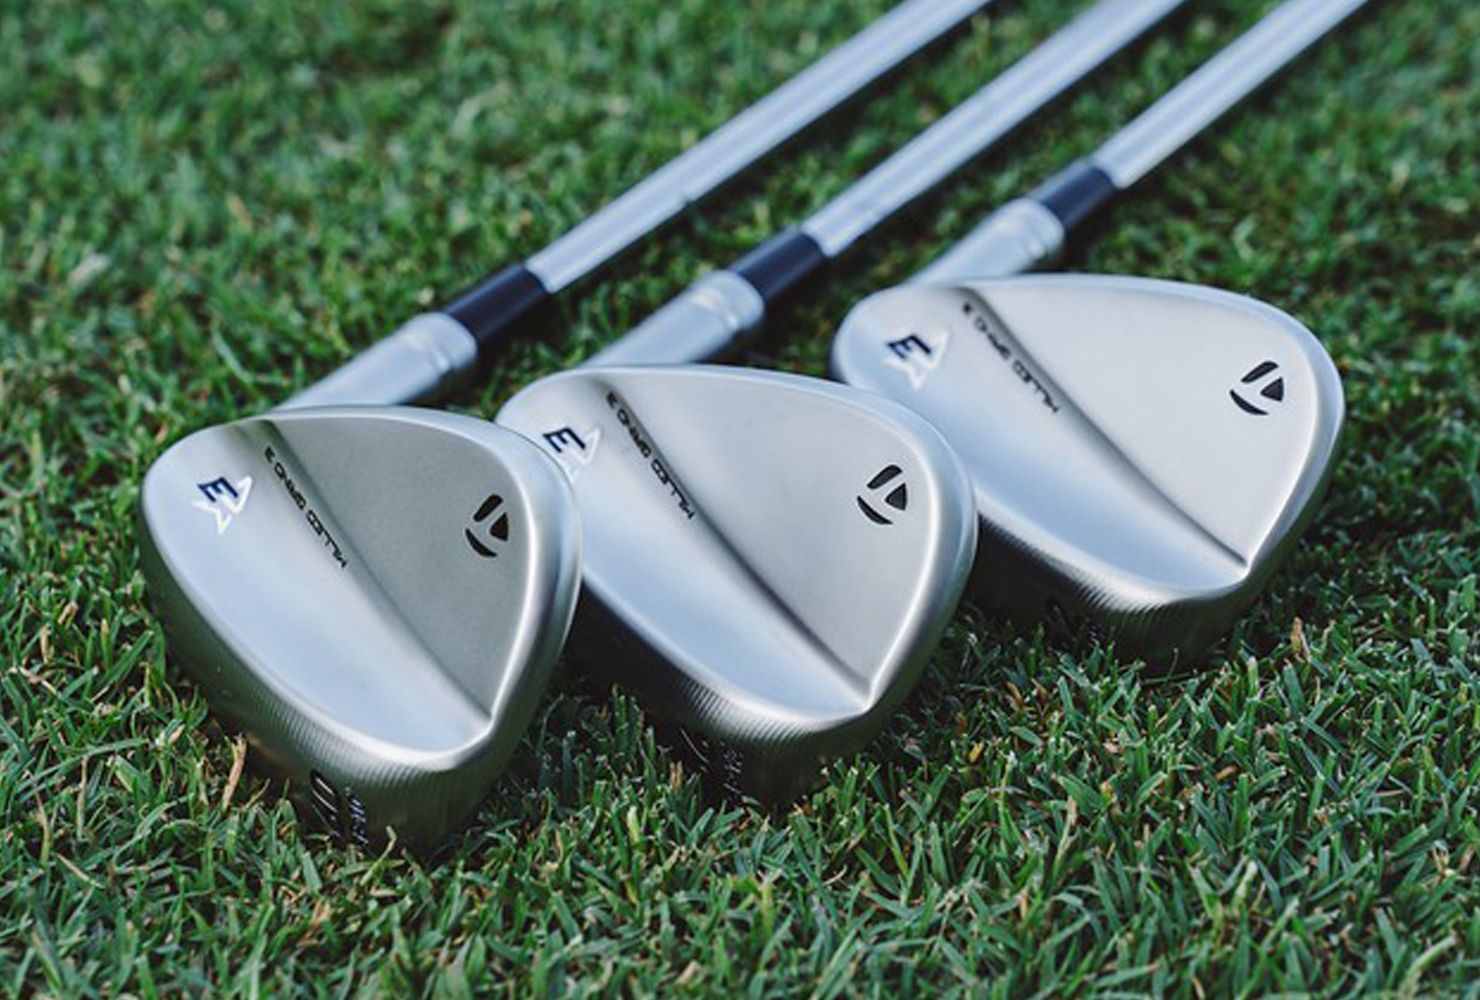 TaylorMade Milled Grind 3 Wedges - The Hackers Paradise